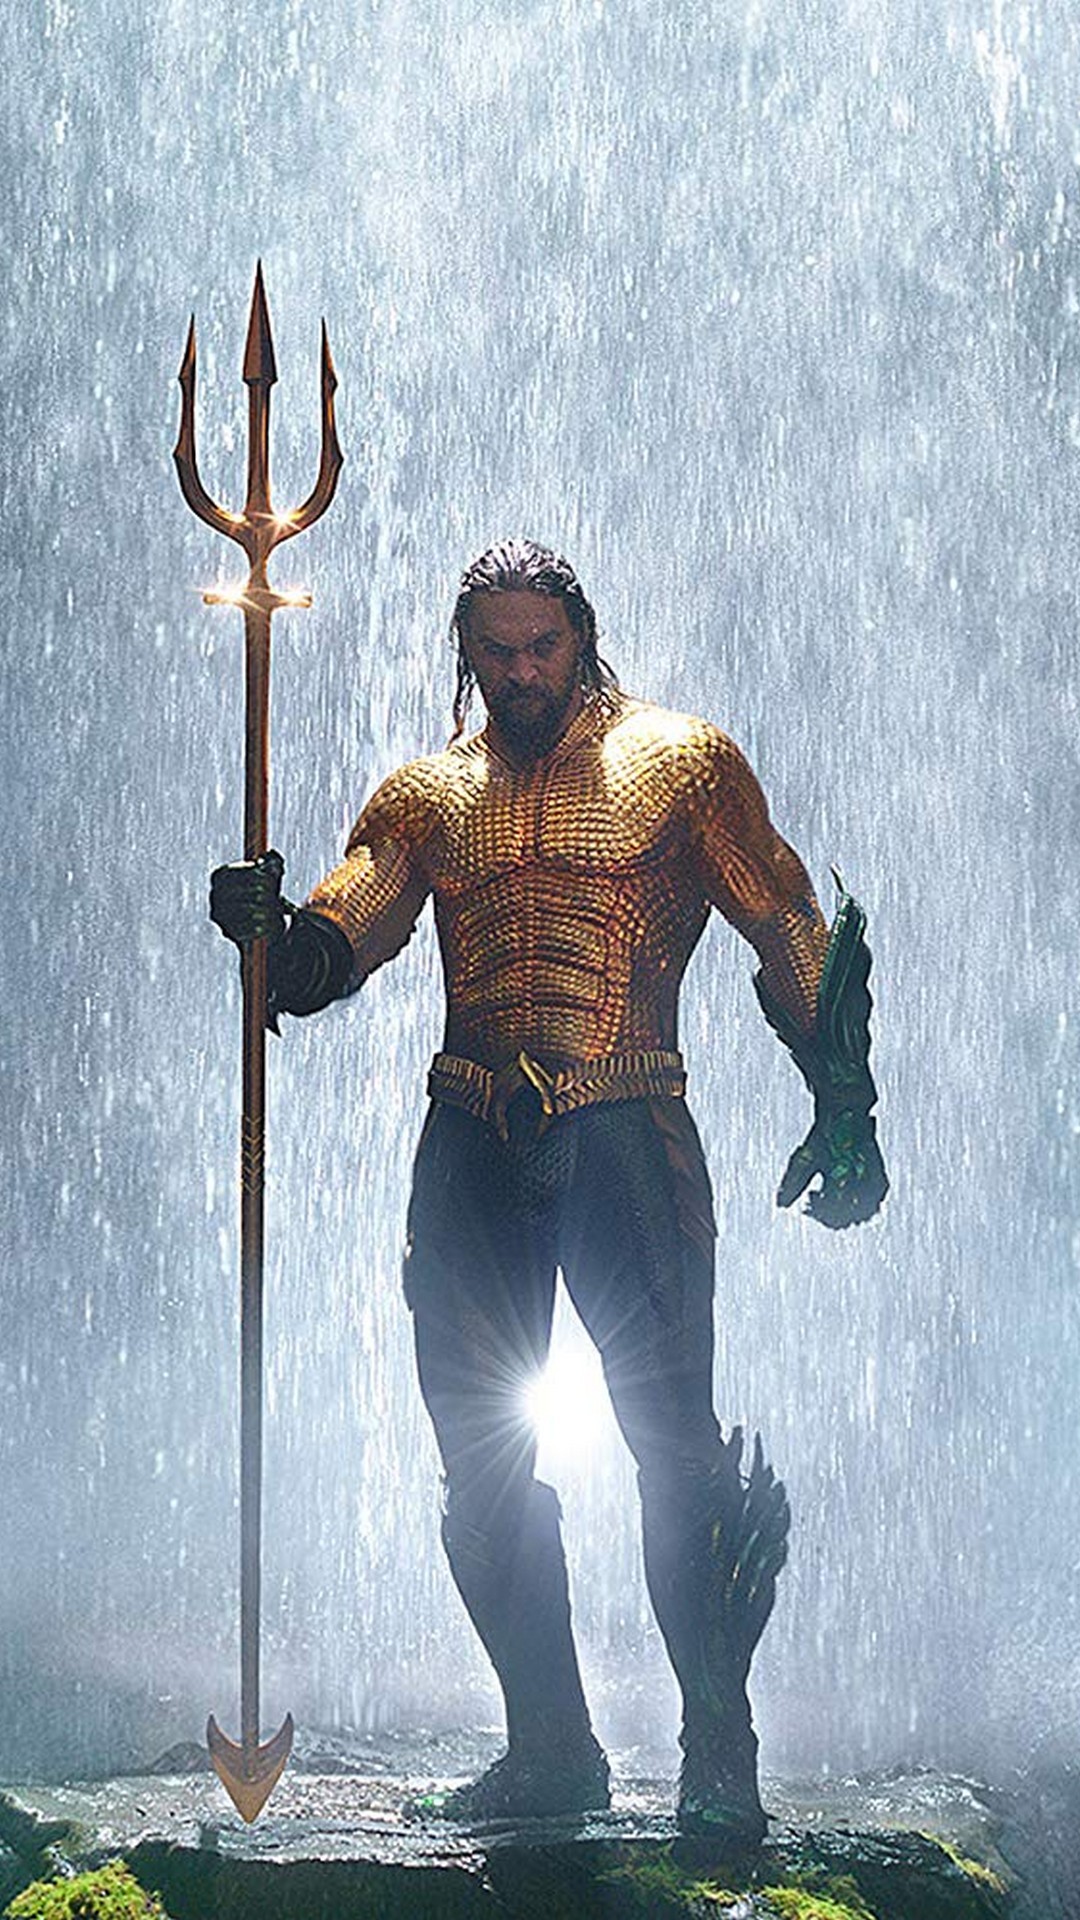 1080x1920 Aquaman 2018 Full Movie Poster with resolution  pixel. You can  make this wallpaper for